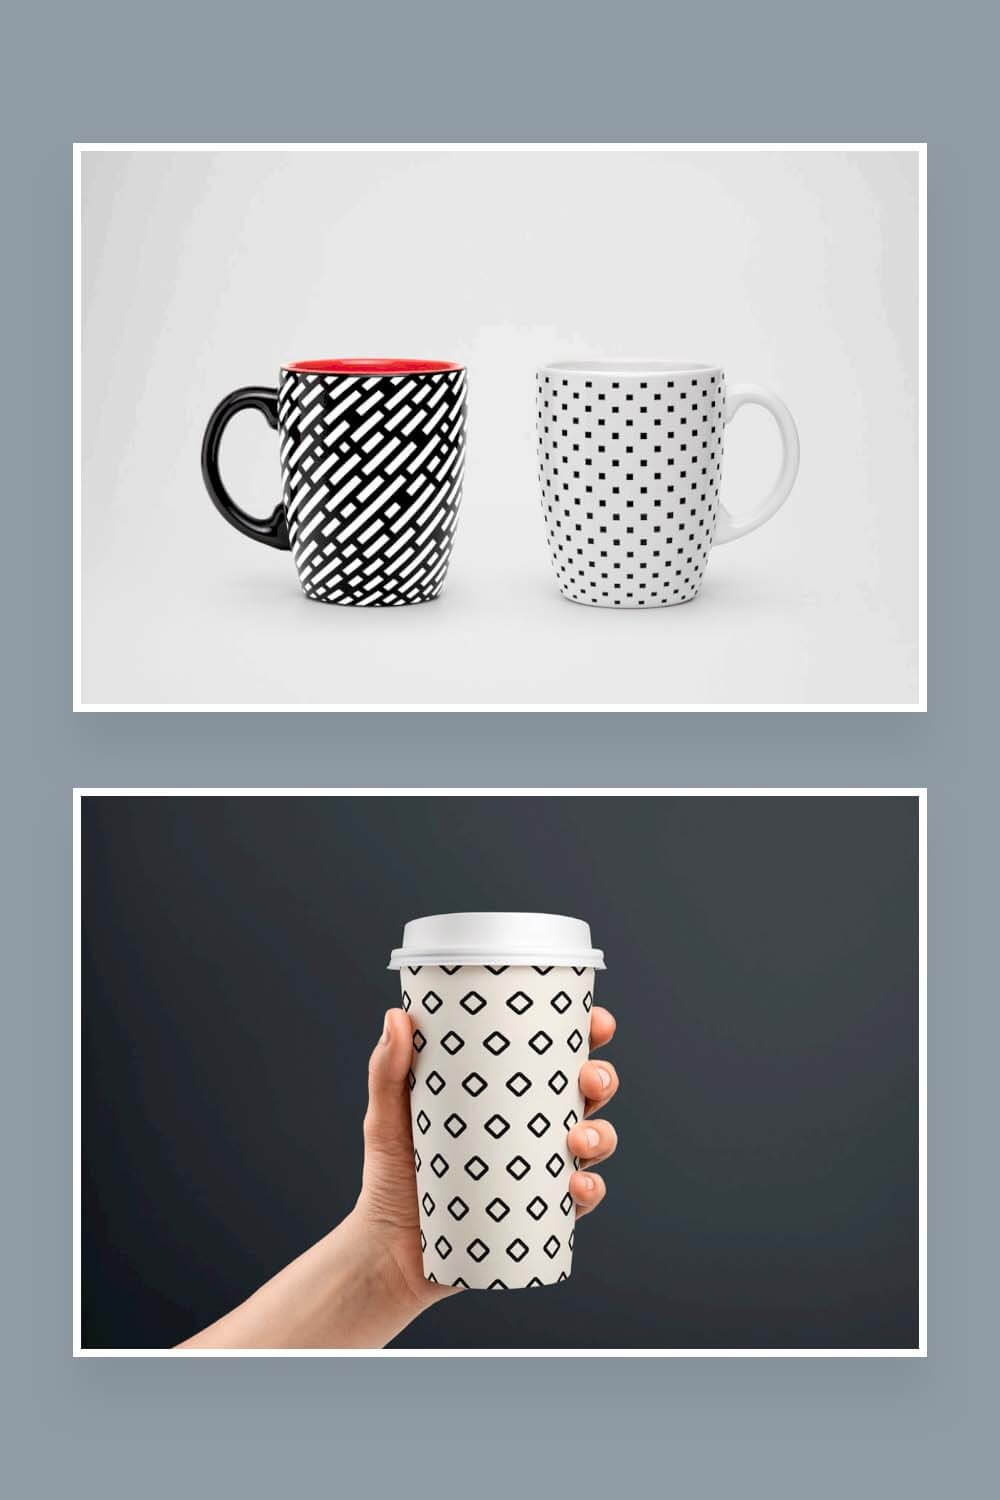 Seamless square and mesh patterns on a disposable cup and two cups on a gray background.